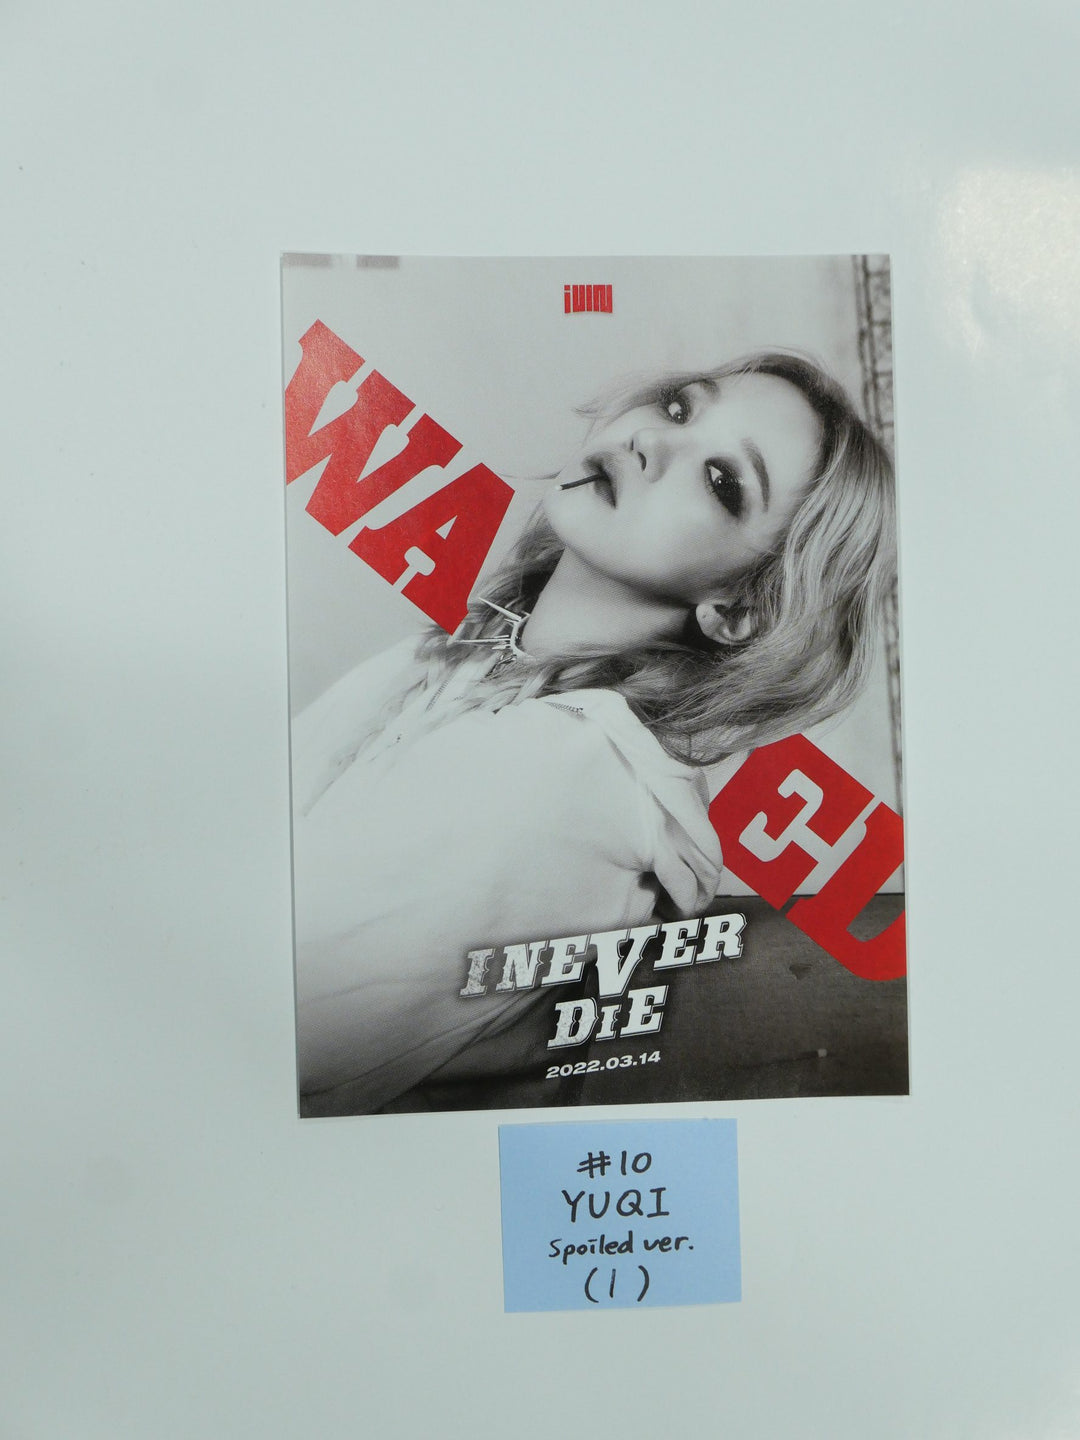 (g) I-DLE "I NEVER DIE" - Official Mini Poster (Restocked 3/18)